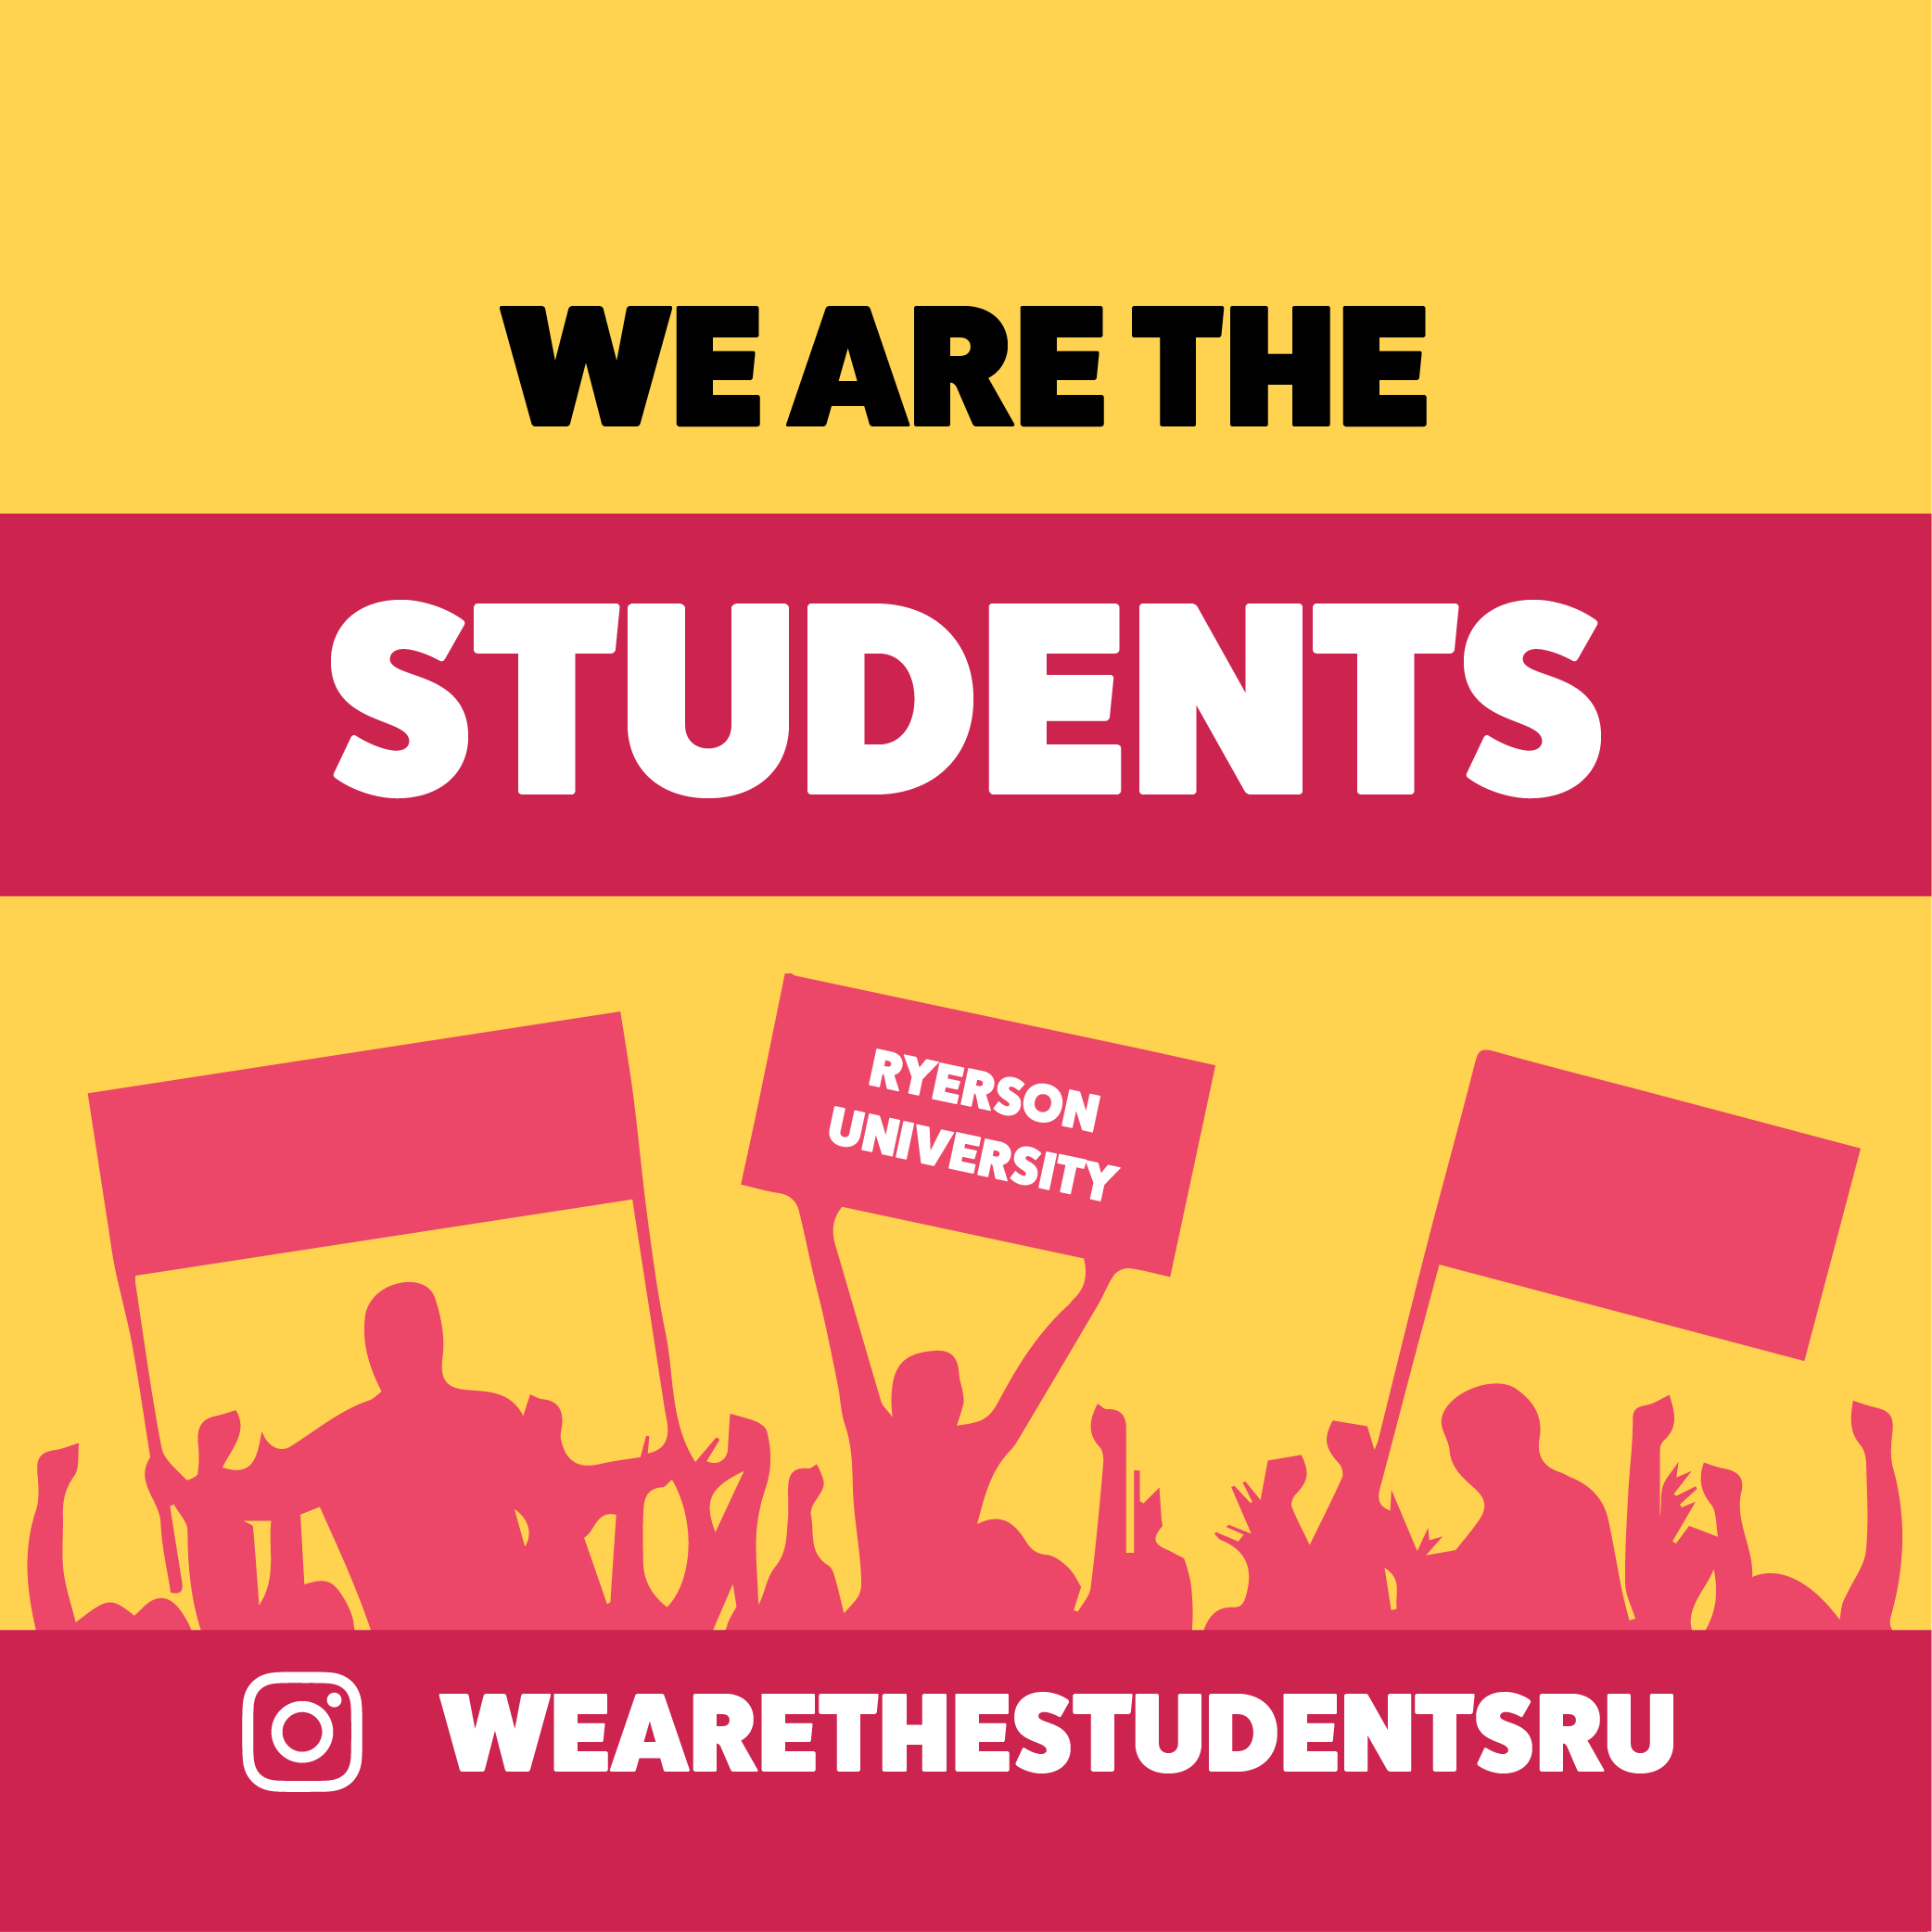 We Are the Students Ryerson: Statement on Ford's Cuts